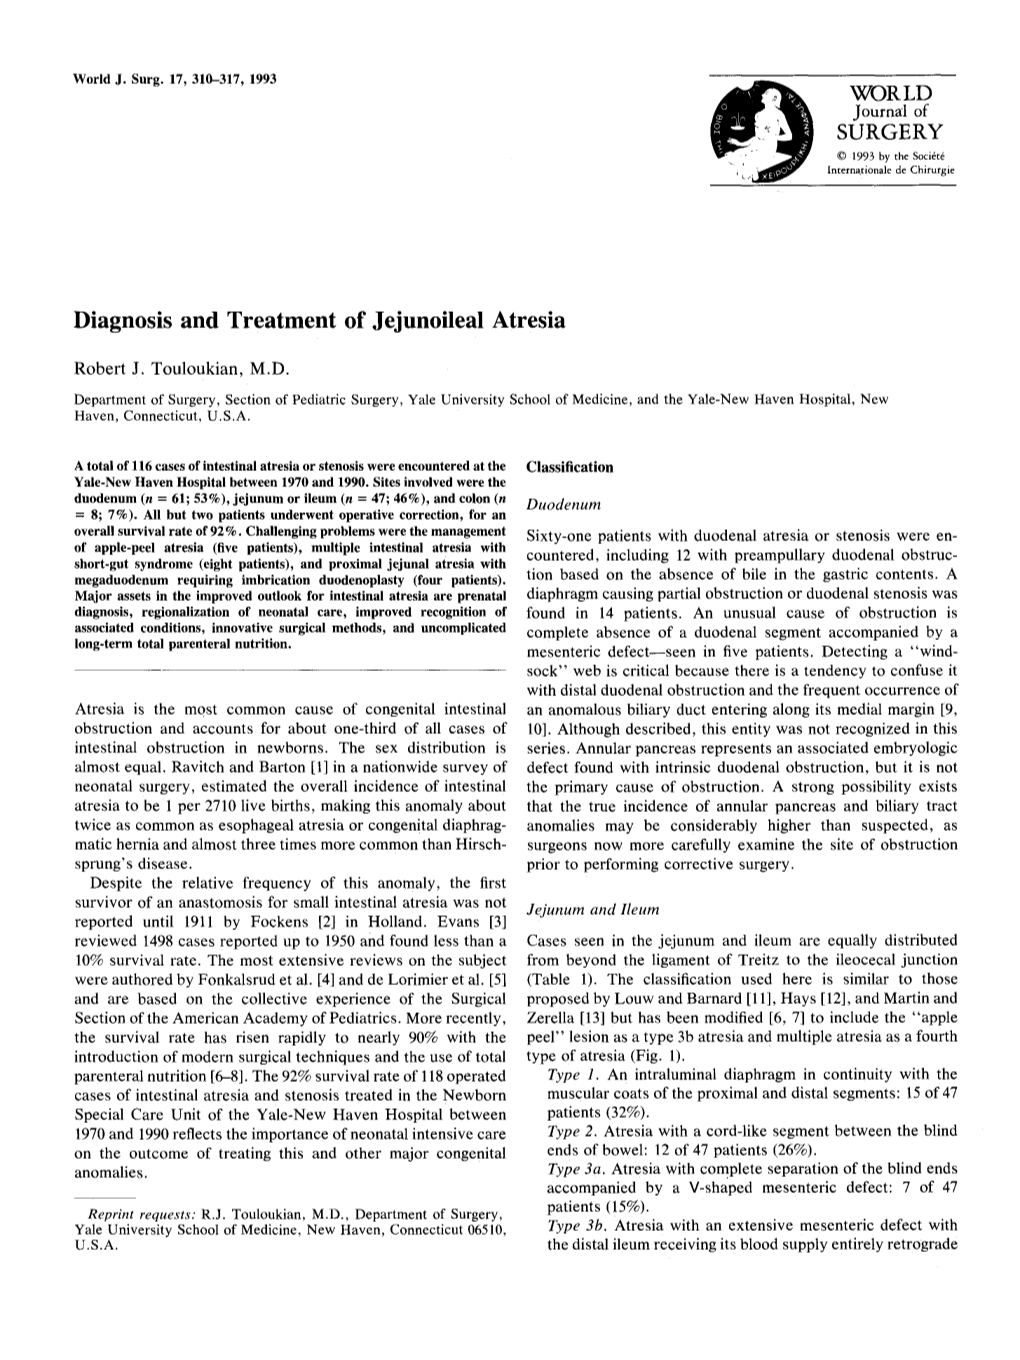 Diagnosis and Treatment of Jejunoileal Atresia